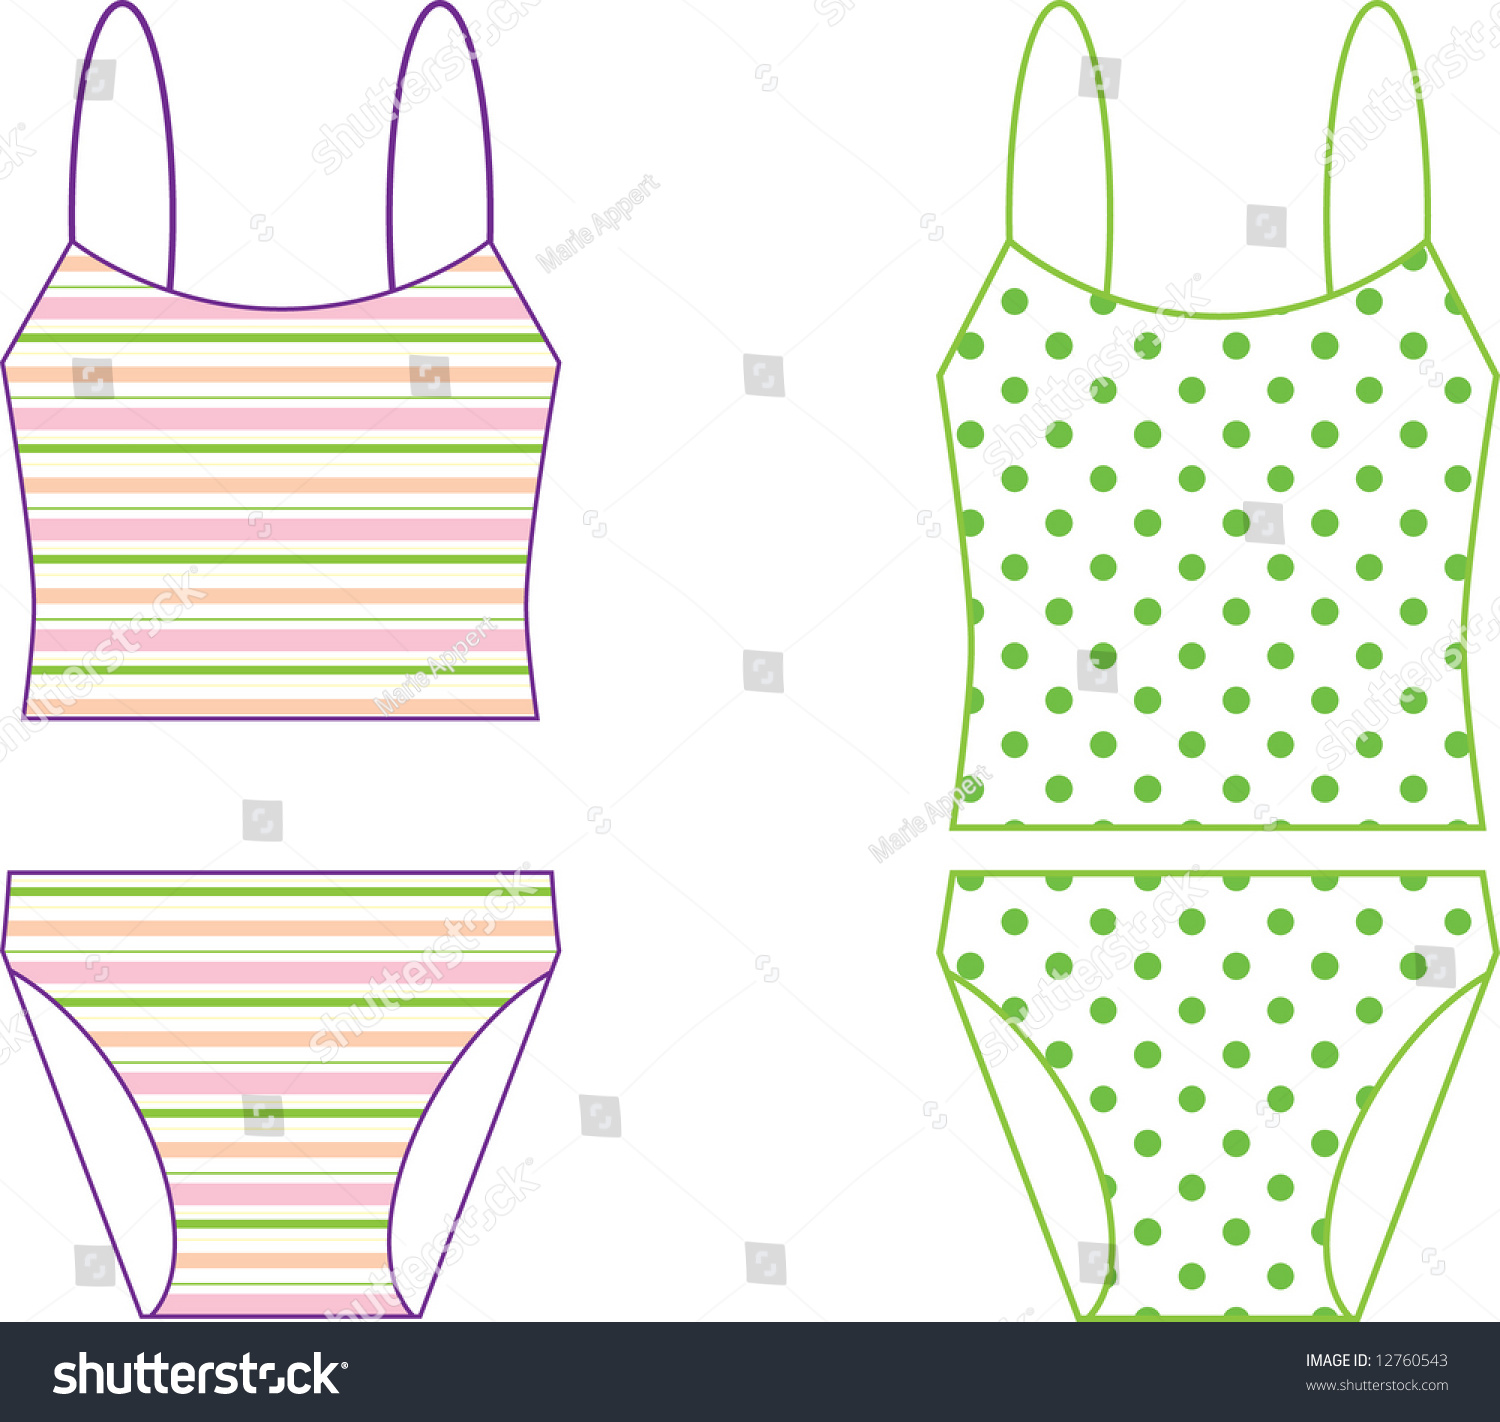 A Striped And A Green Polka Dotted Bathing Suit Stock Vector ...